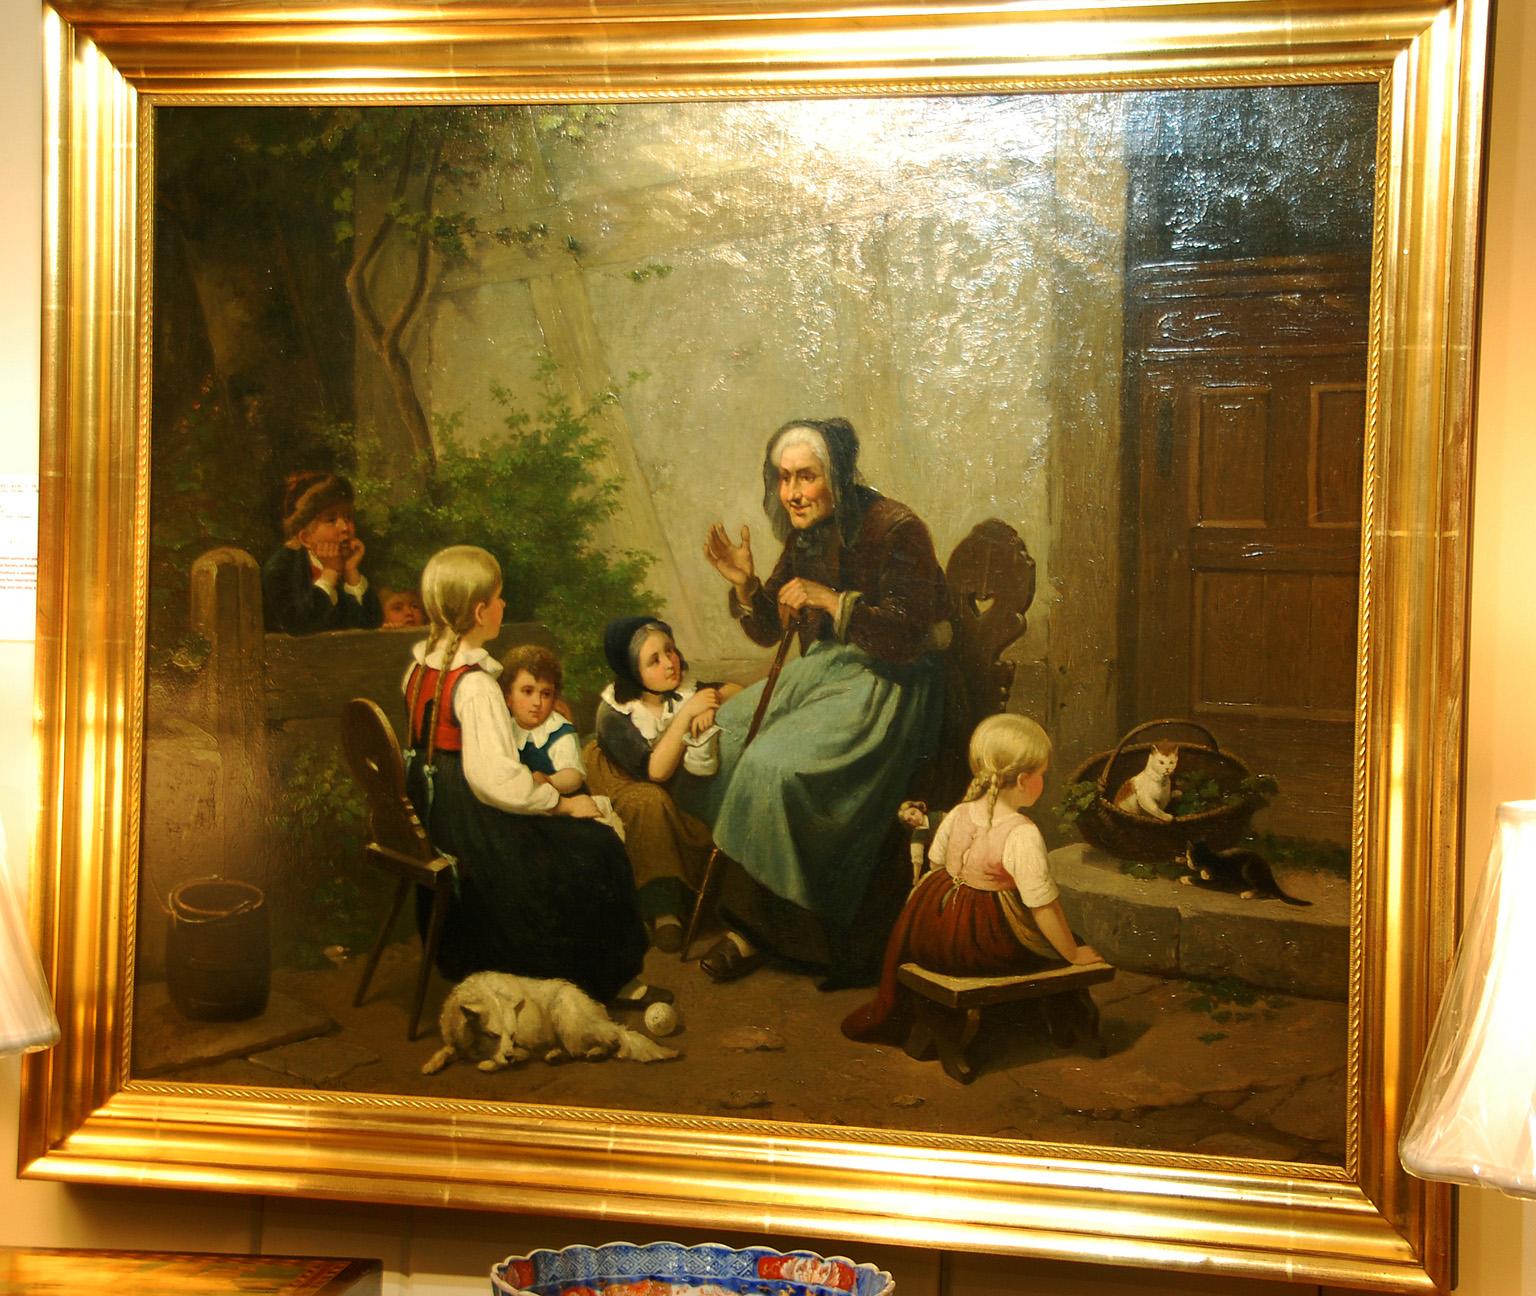 English original l9th century oil painting on canvas by William Poole. This large genre painting by noted portraitist William Poole, captures a moment when Granny has center stage and the children, with their dog and cats nearby, listen avidly to